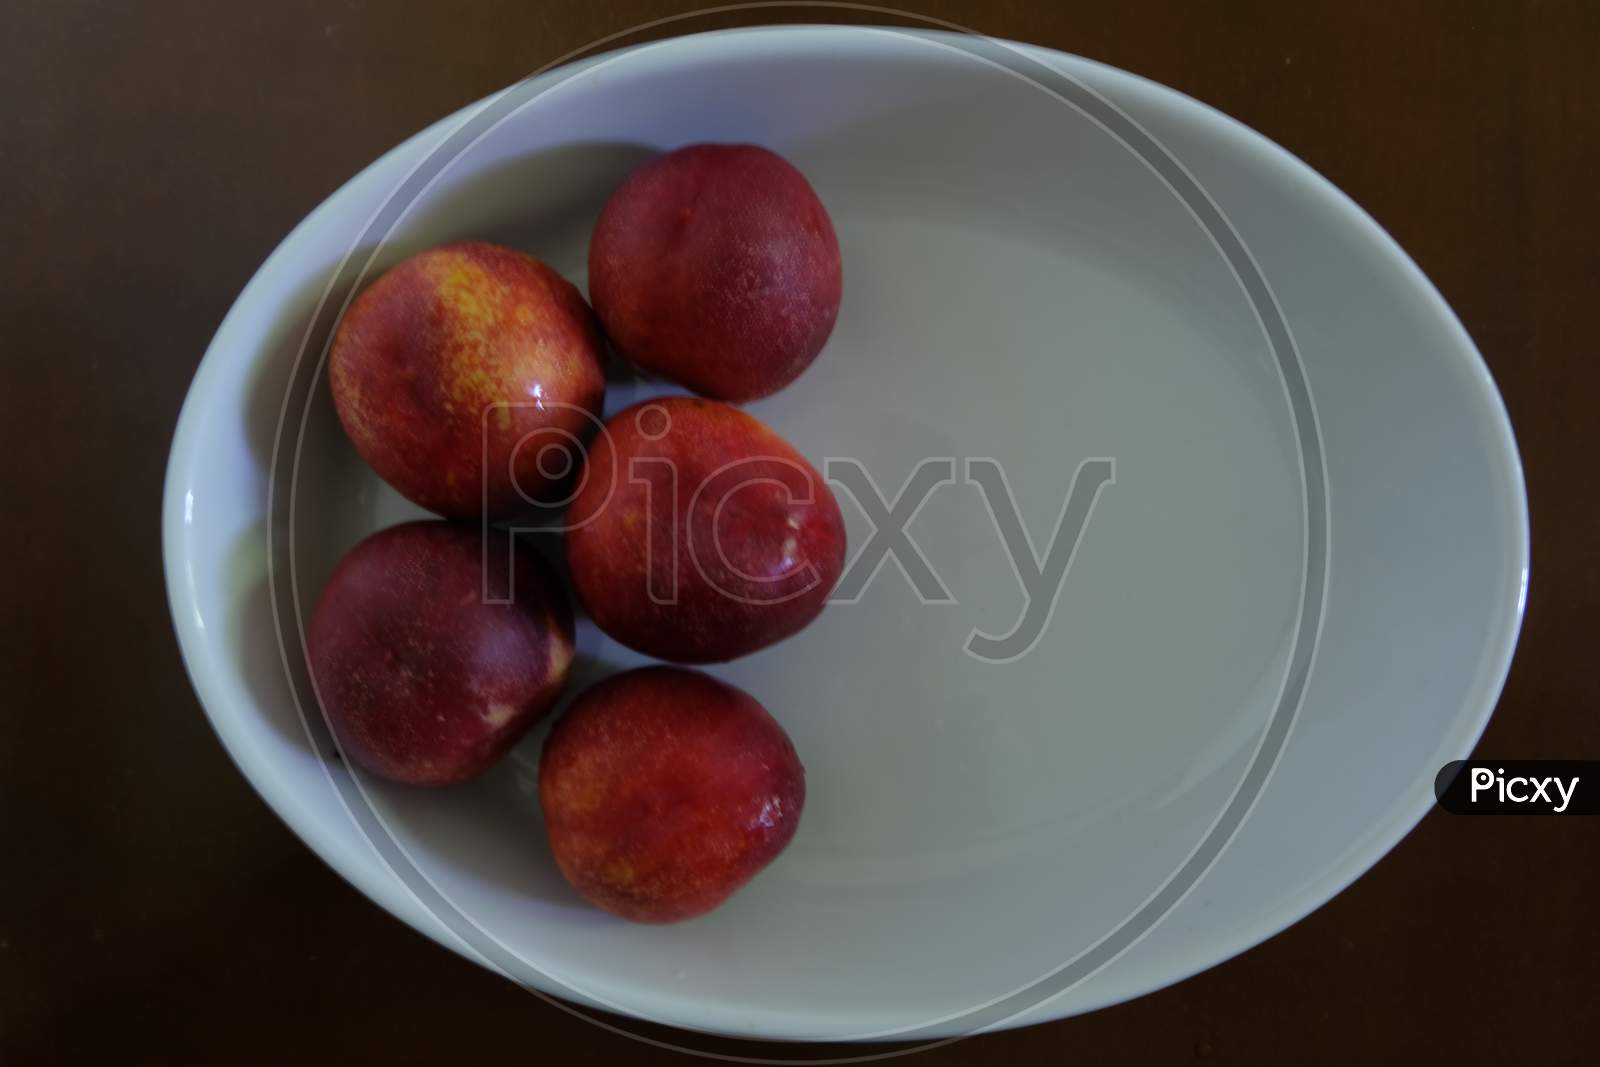 Peaches in an oval white tray.